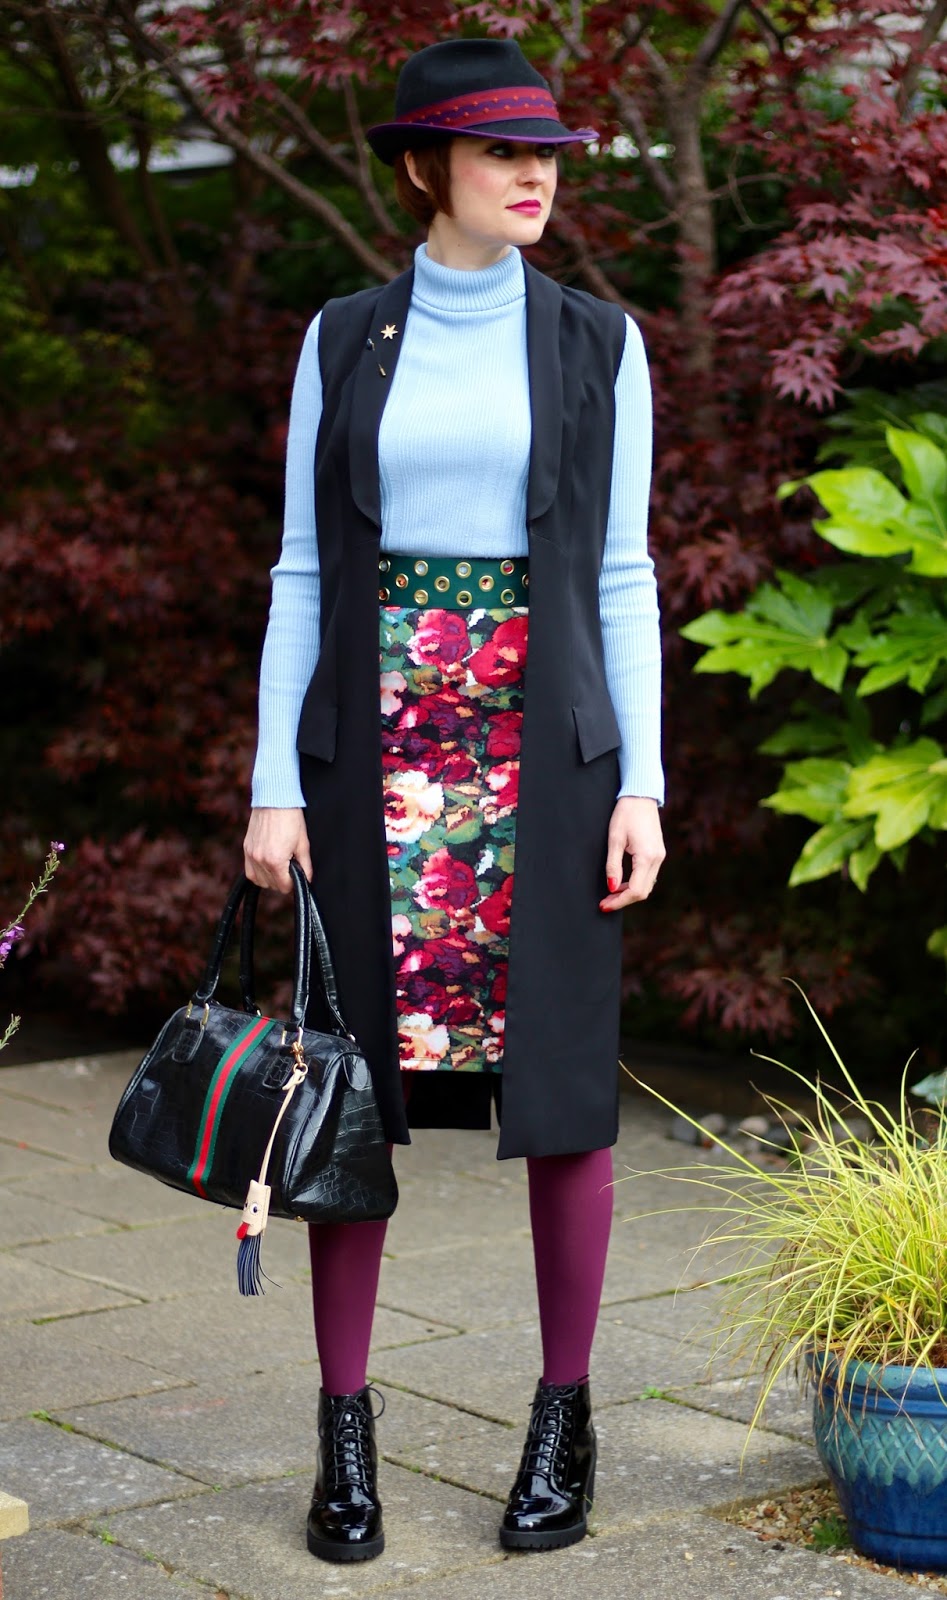 Fake Fabulous | Christys Trilby, floral pencil skirt, sleeveless jacket, patent vagabond boots | Hats